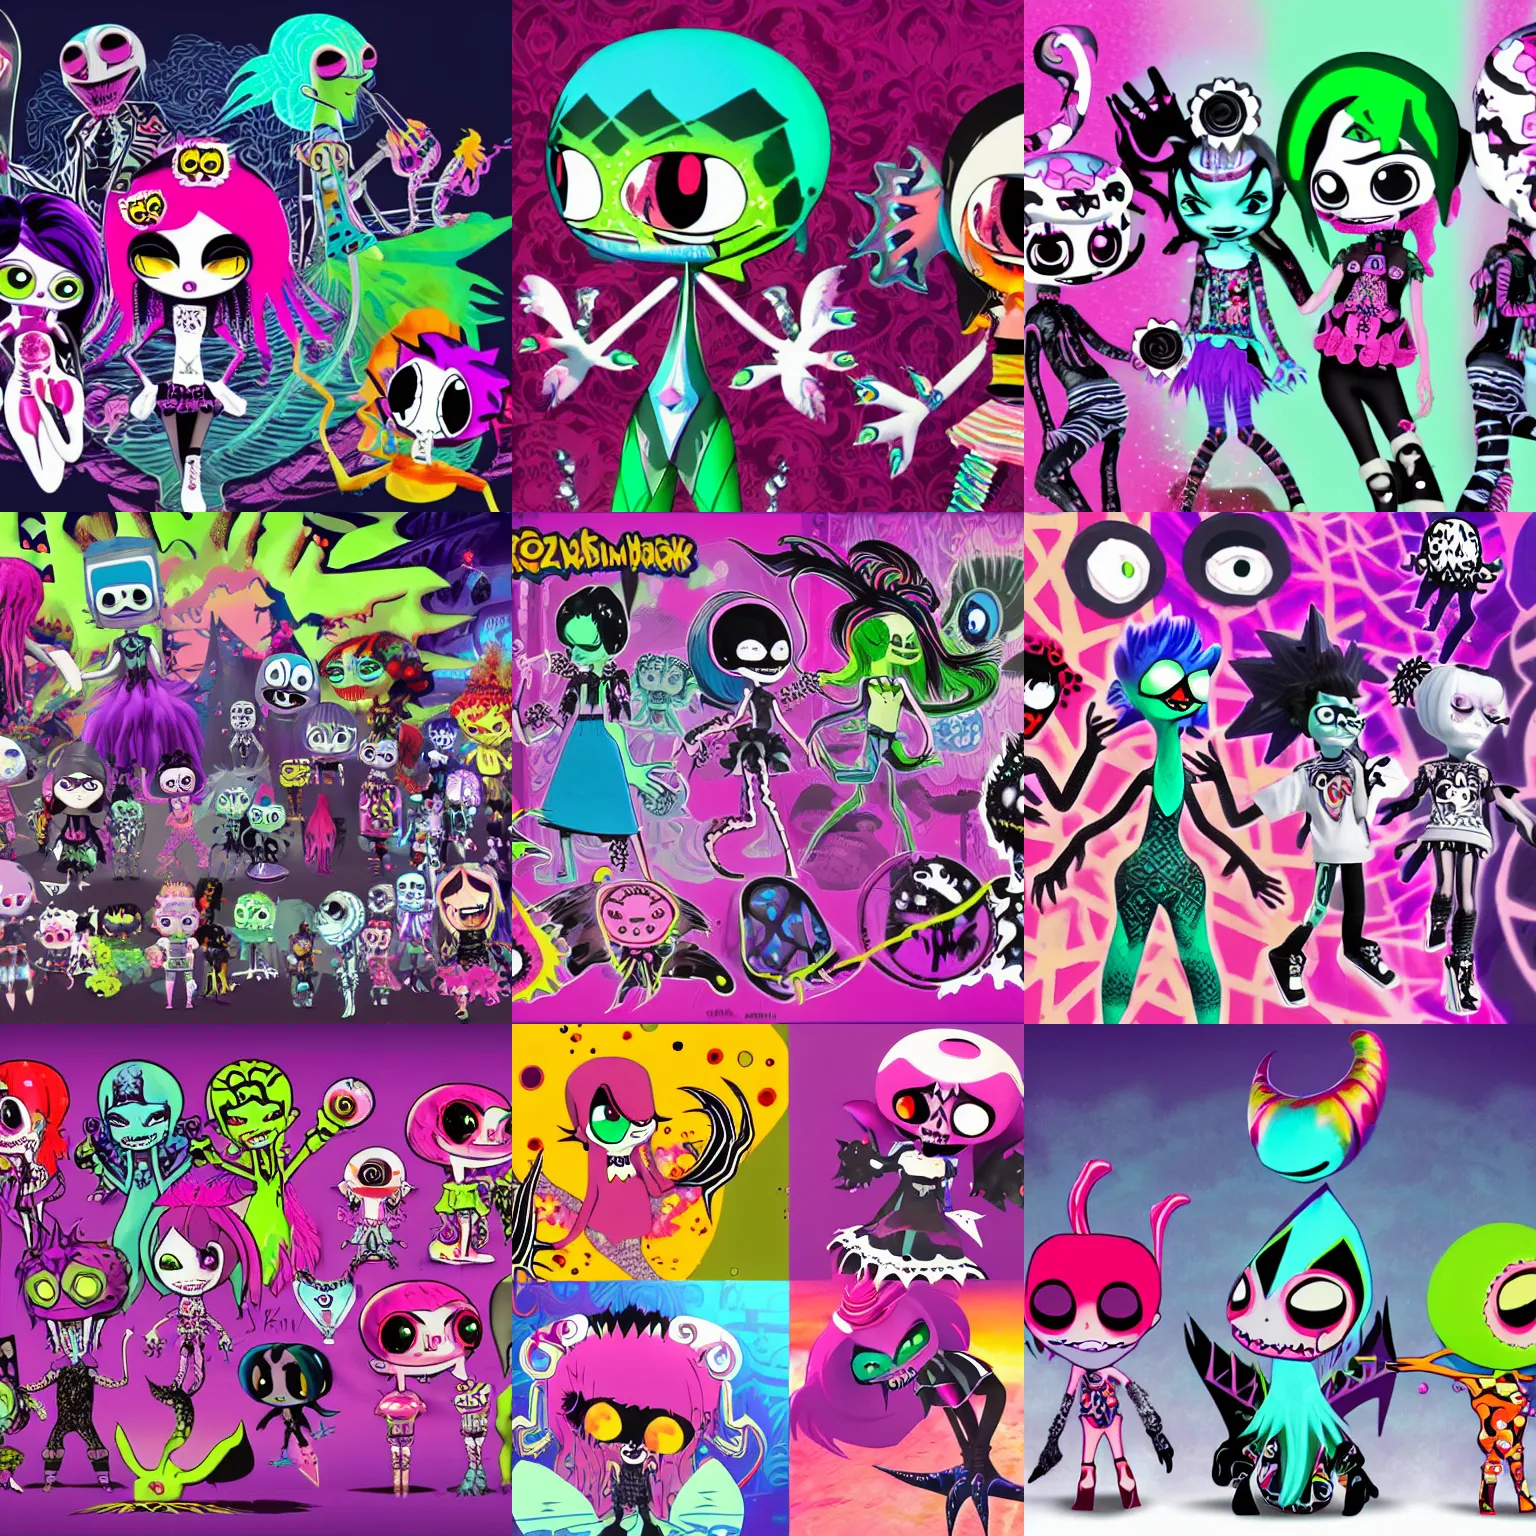 Prompt: CGI lisa frank gothic punk vampiric underwater vampiric squid character designs of various shapes and sizes by genndy tartakovsky and ruby gloom by martin hsu and the creators of fret nice being overseen by Jamie Hewlett from gorillaz and tim shafer from doublefine for a splatoon game by nintendo